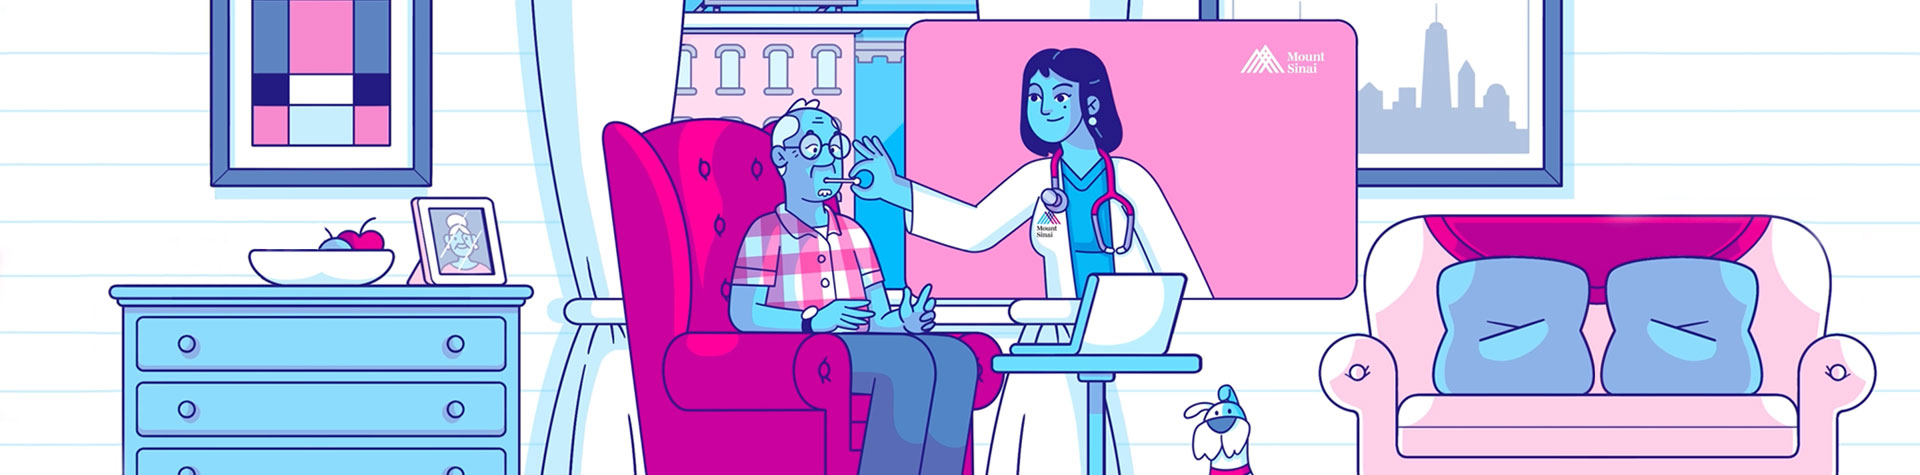 Illustration of doctor taking patient’s temperature from a video screen